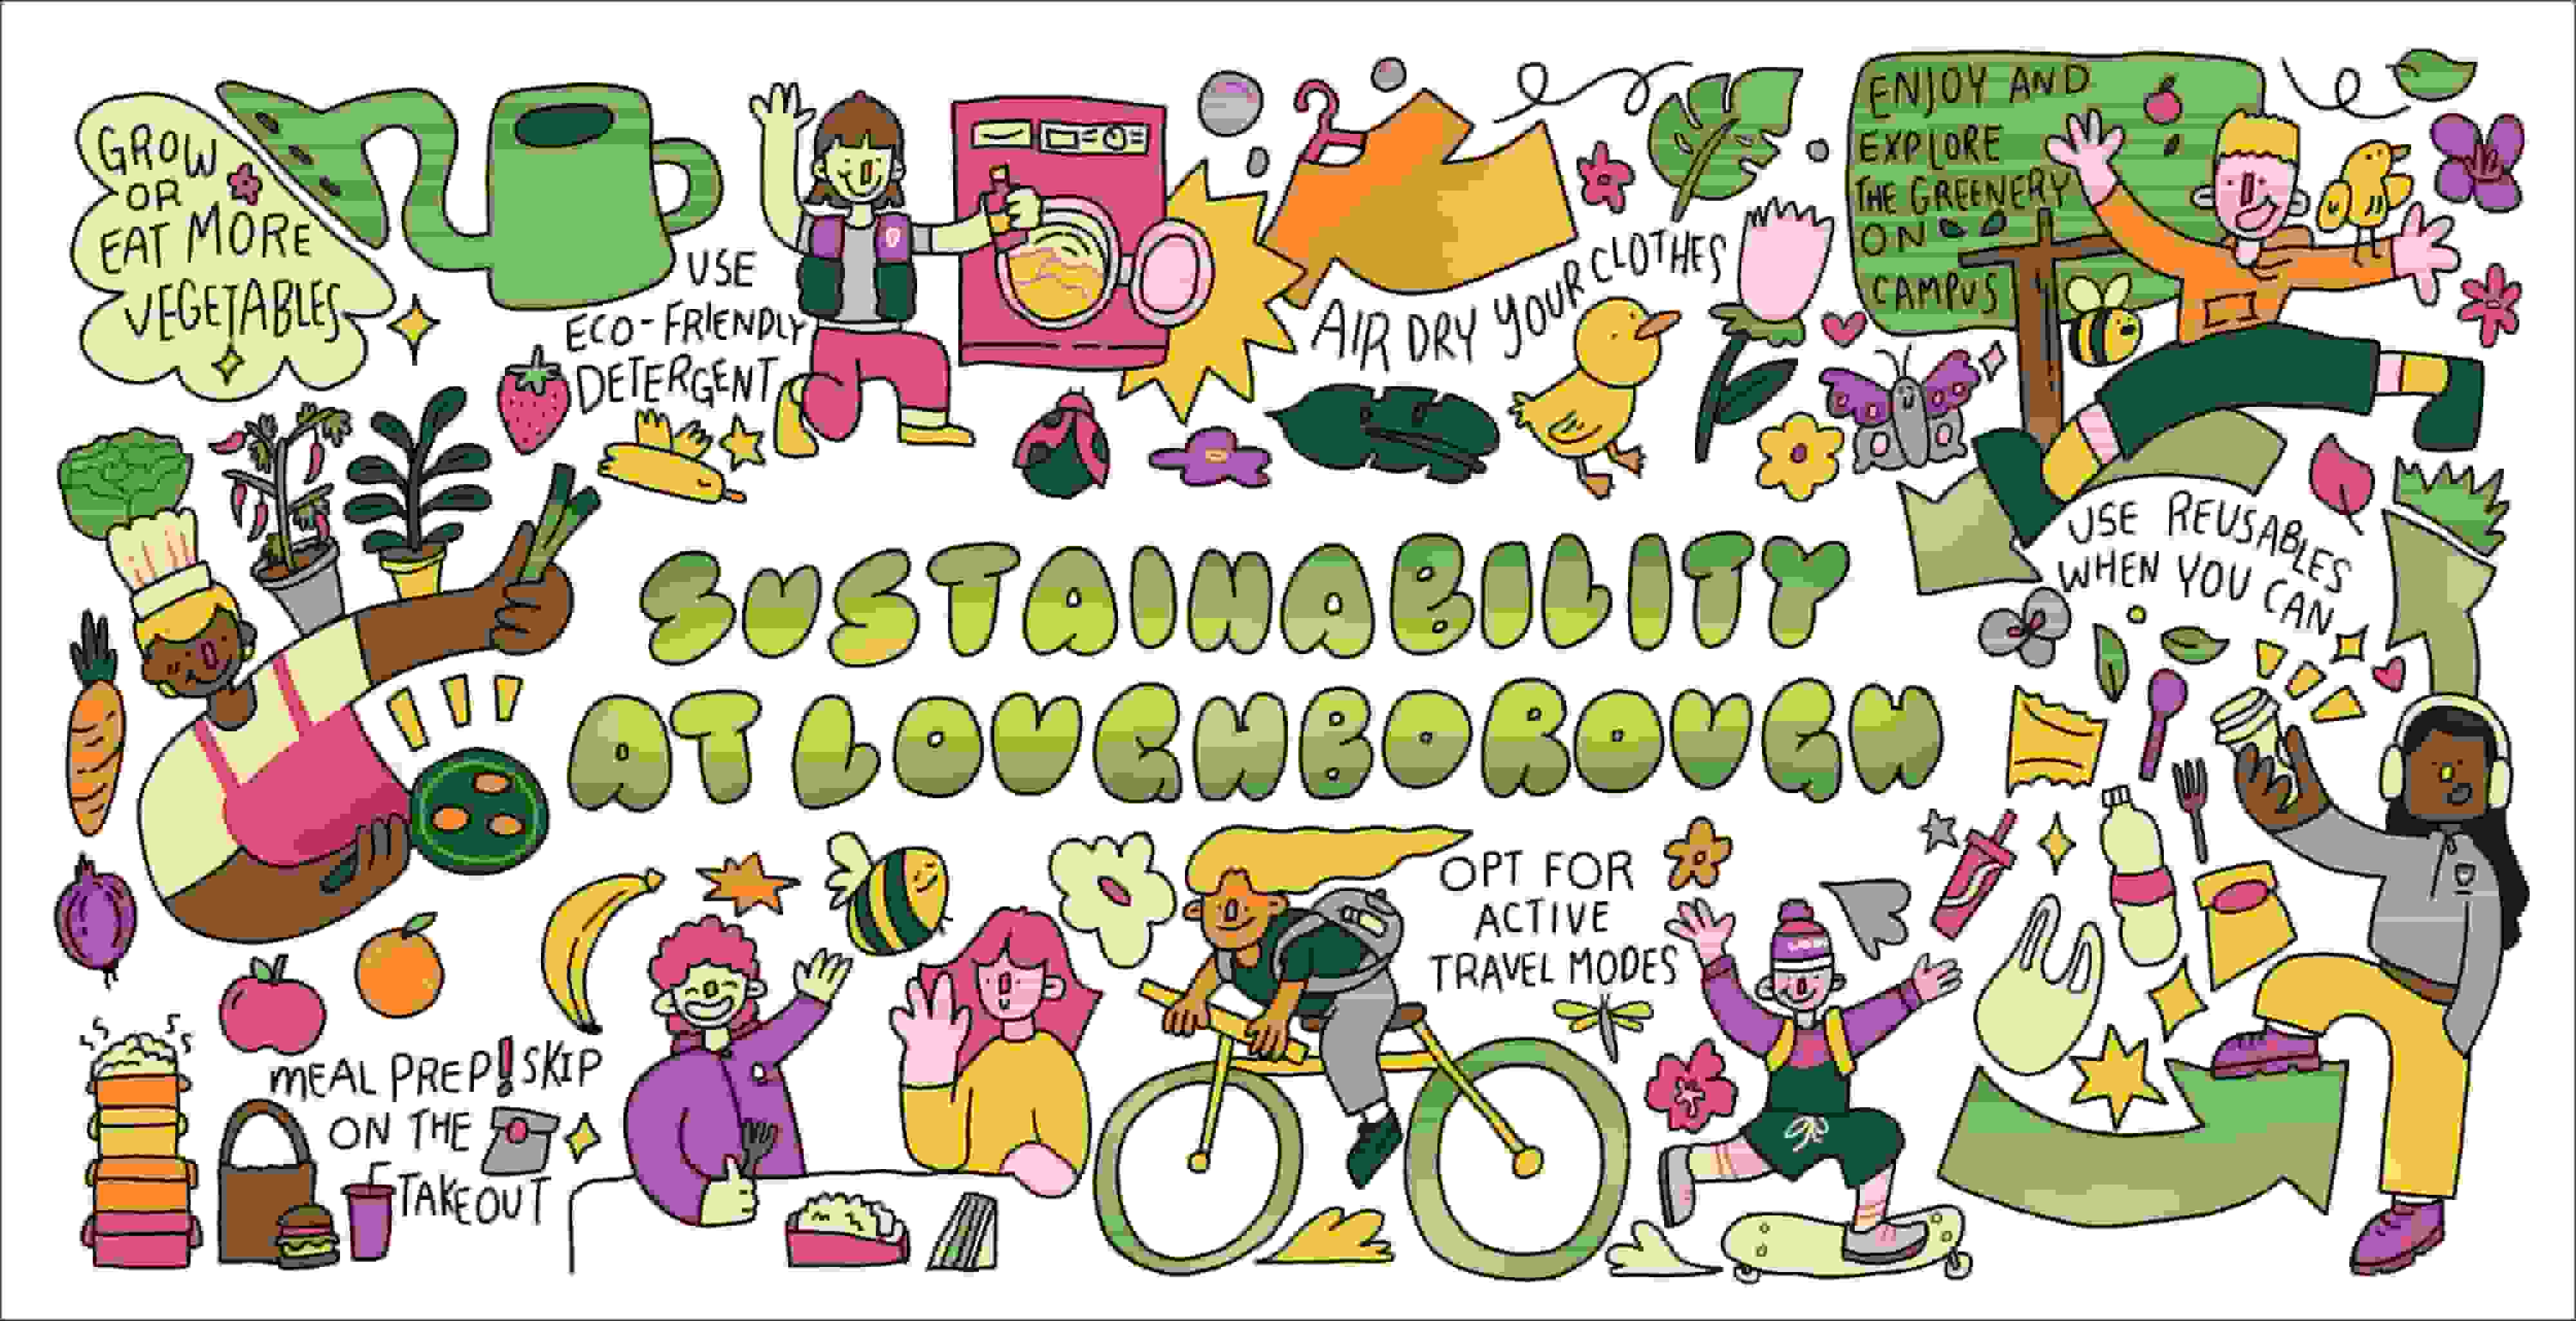 Illustrations of people practicing sustainability and text of sustainable ideas, sustainable icons such as flowers and fruit and the title in the centre 'Sustainability at Loughborough'.